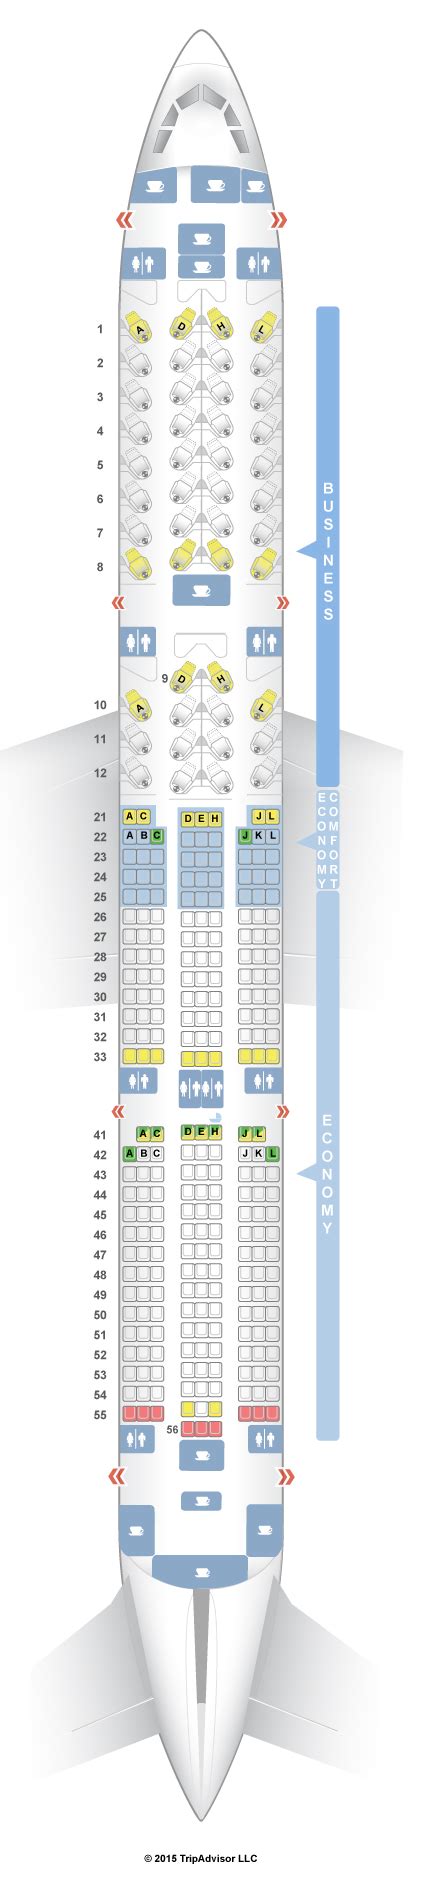 Seatguru airbus a350 900. Airbus A350-900 (359) Layout 2. Note: There are 3 versions of this aircraft. Seat Map; Info; Photos; Click any seat for more information. Key ... 